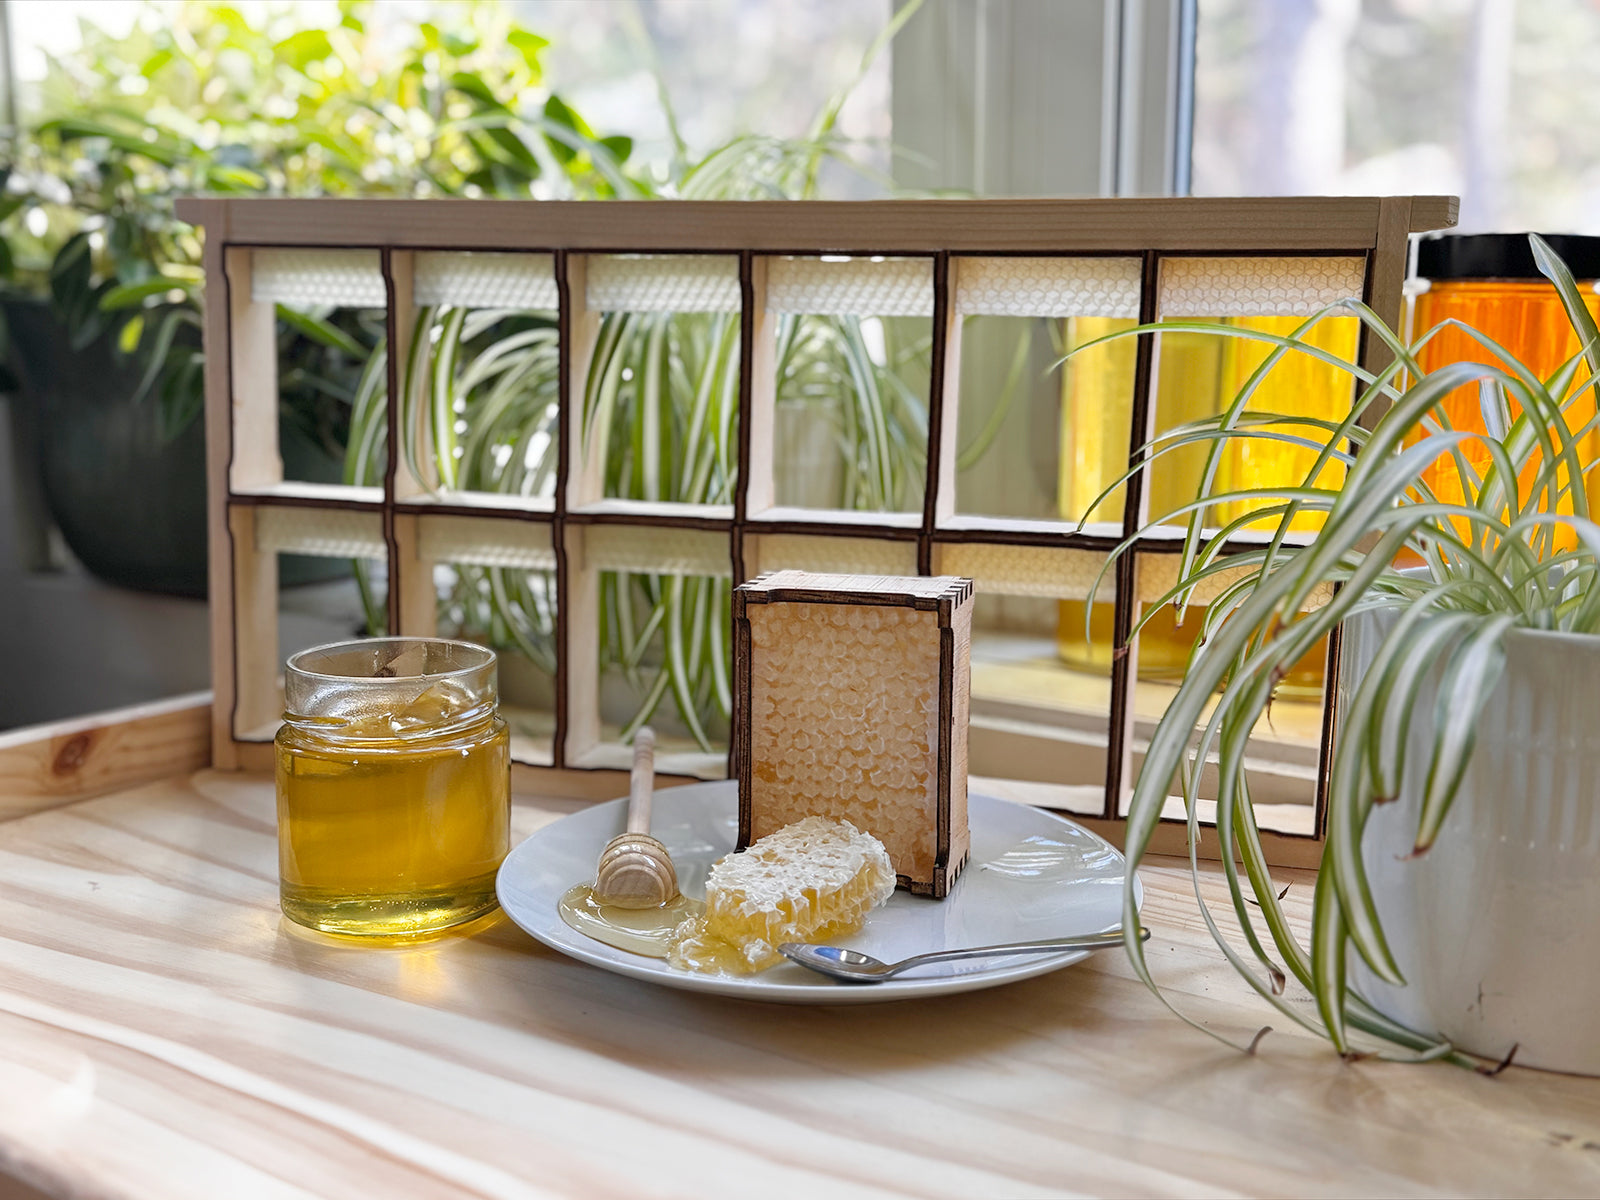 Cozy setting with fresh honeycomb and liquid honey on a plate with a plant and the sun shining through.